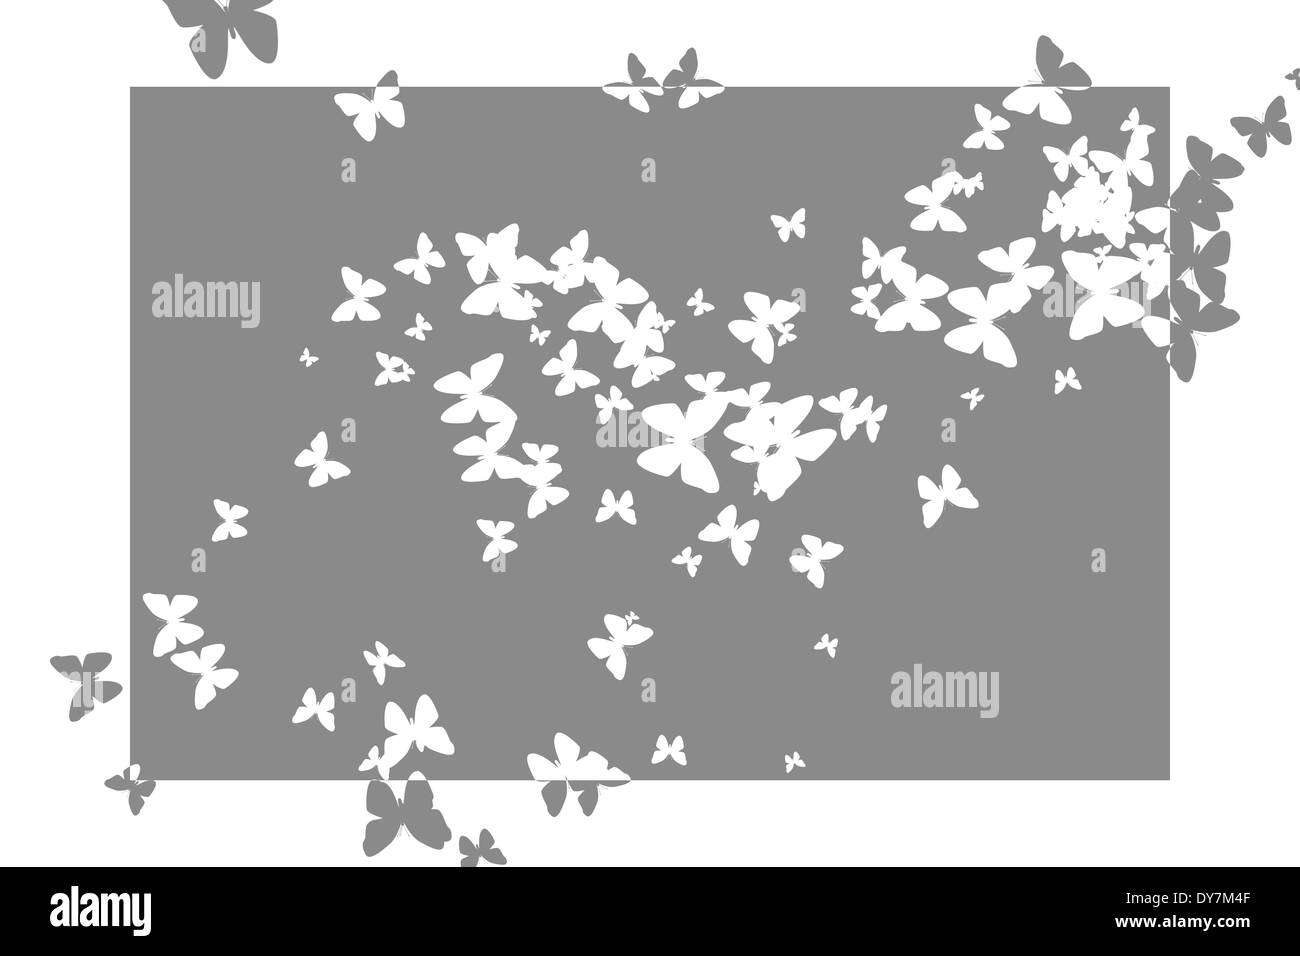 Stencil butterfly pattern design in grey and white Stock Photo